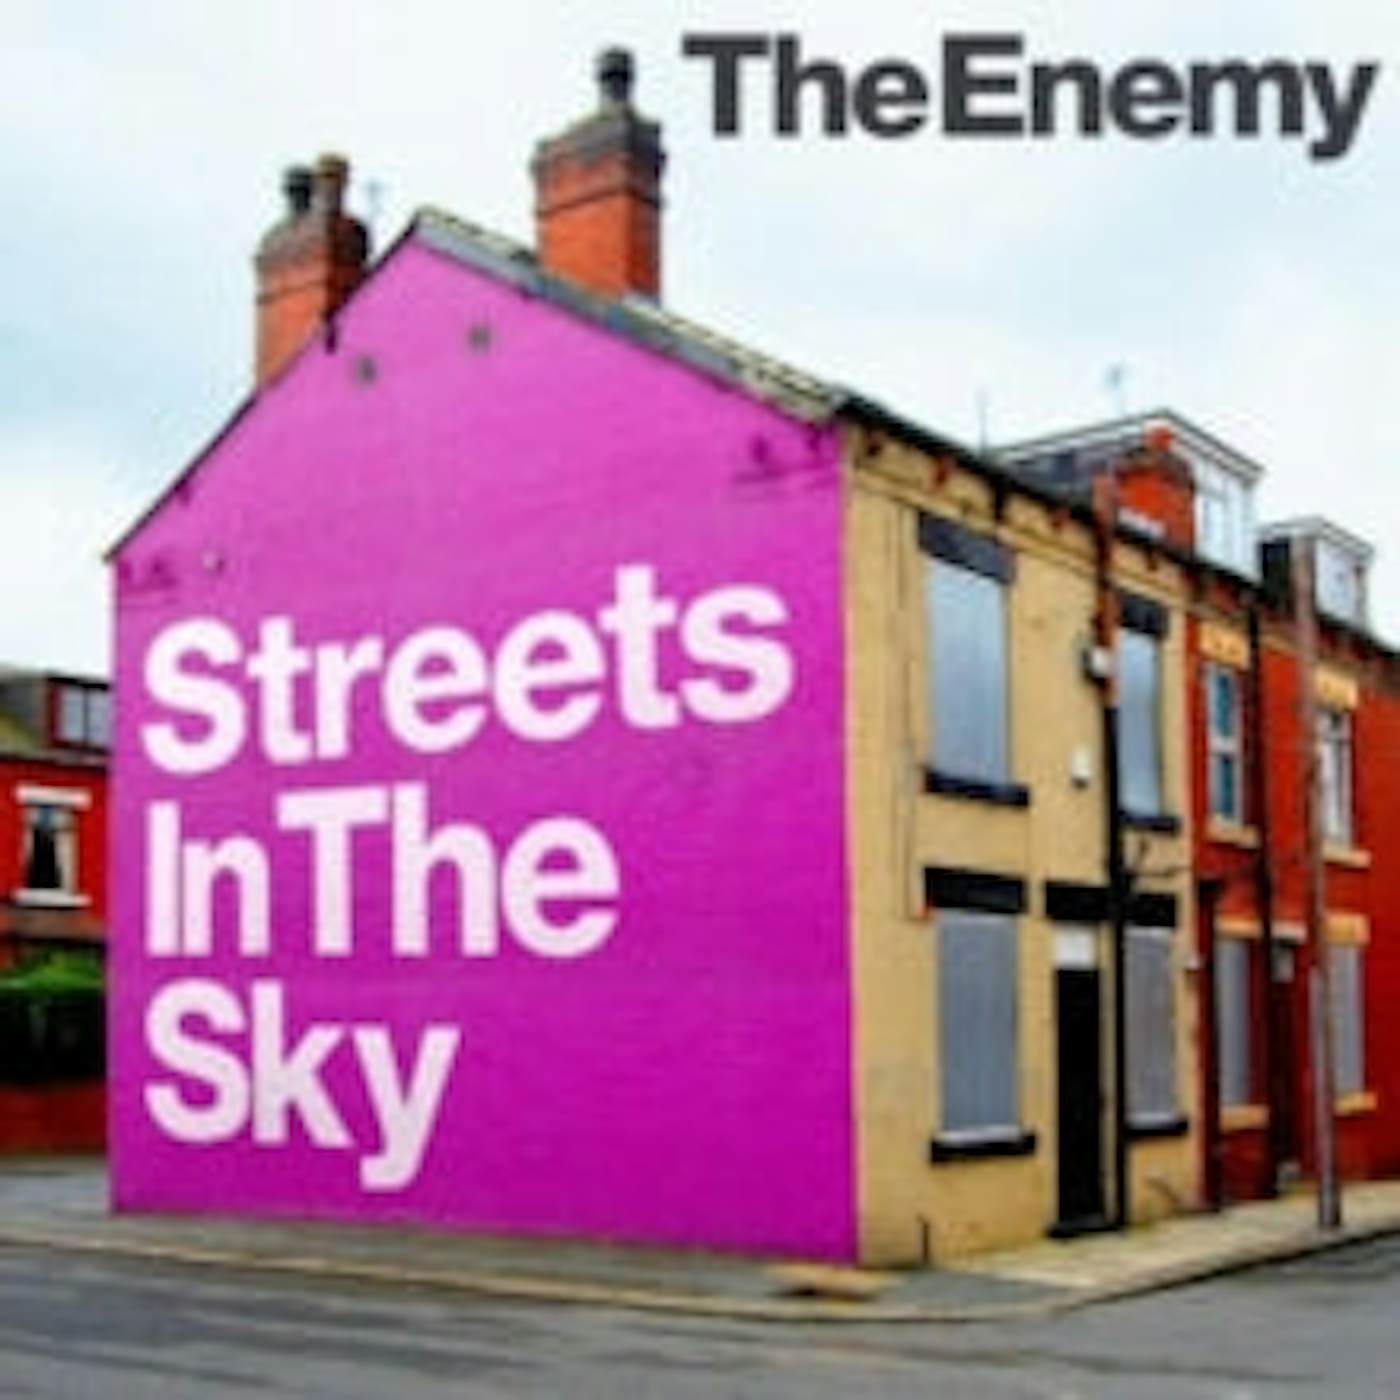 The Enemy CD - Streets In The Sky